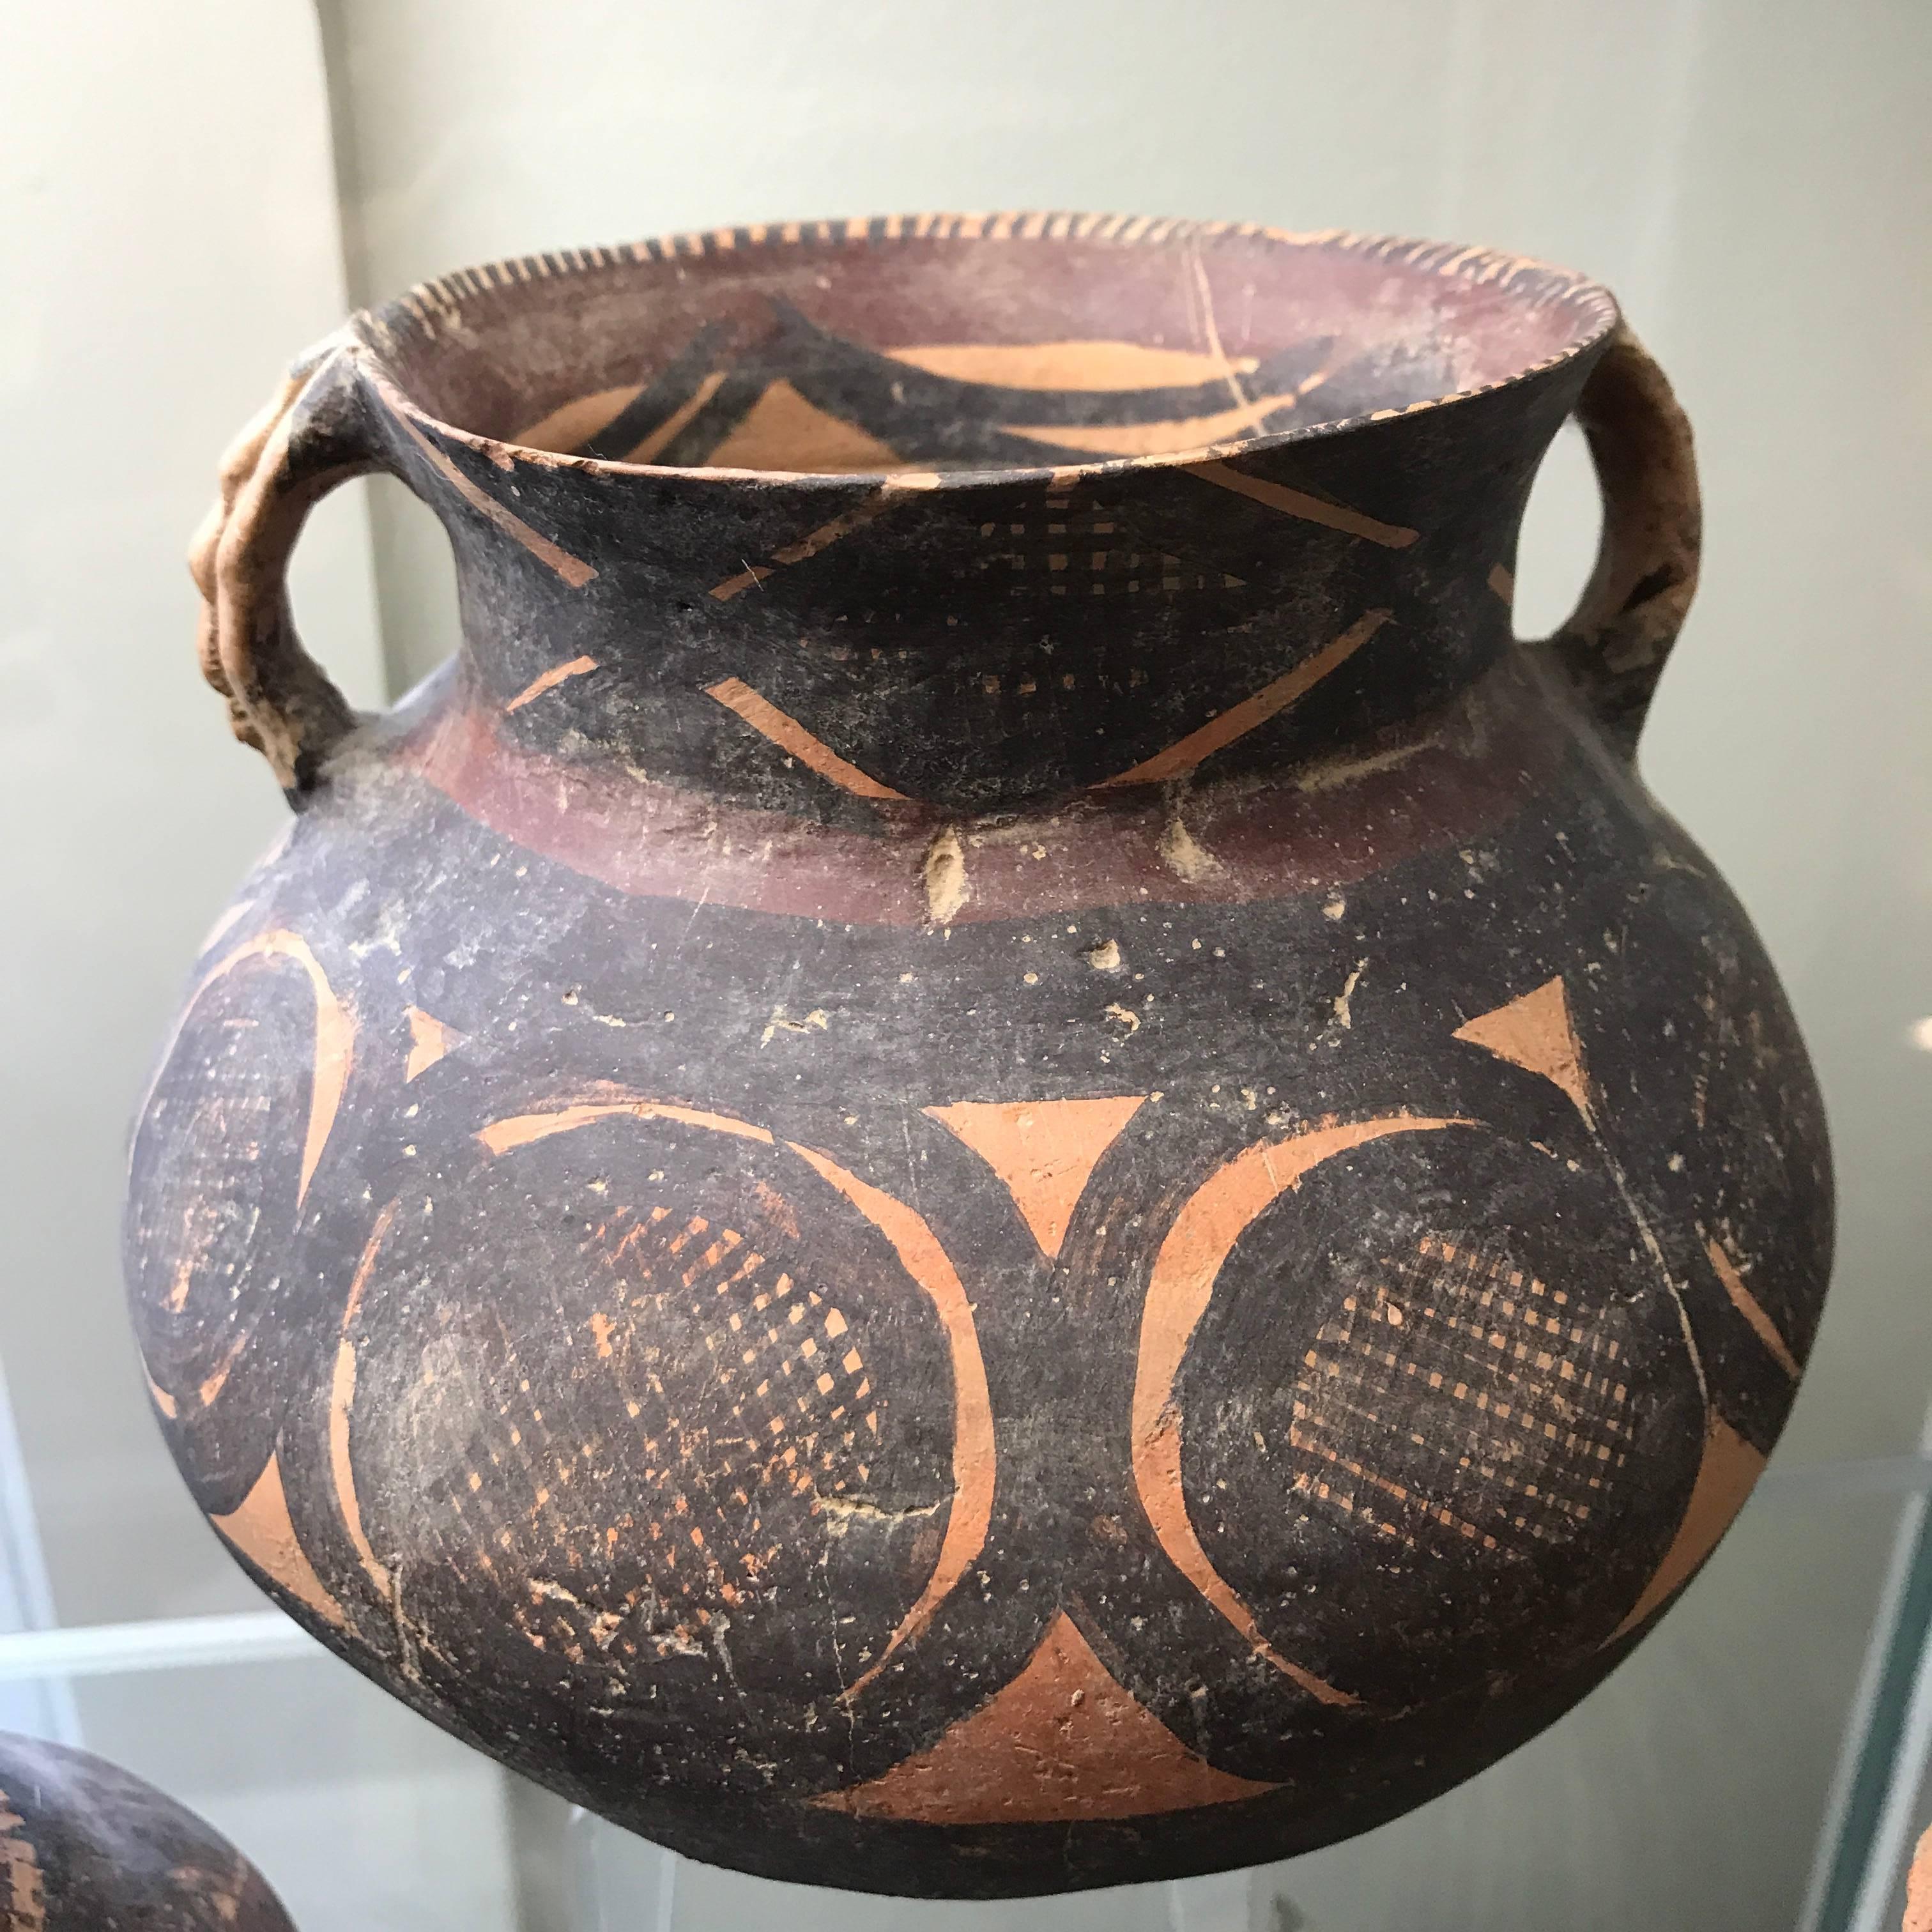 Ancient Chinese Collection Three (3) Fine Neolithic Pots

This is an excellent handmade and hand-painted collection of three (3)  Ancient Chinese Machang culture pots with brilliant designs dating to the 2500-2000 BCE era.

These pots are quite well